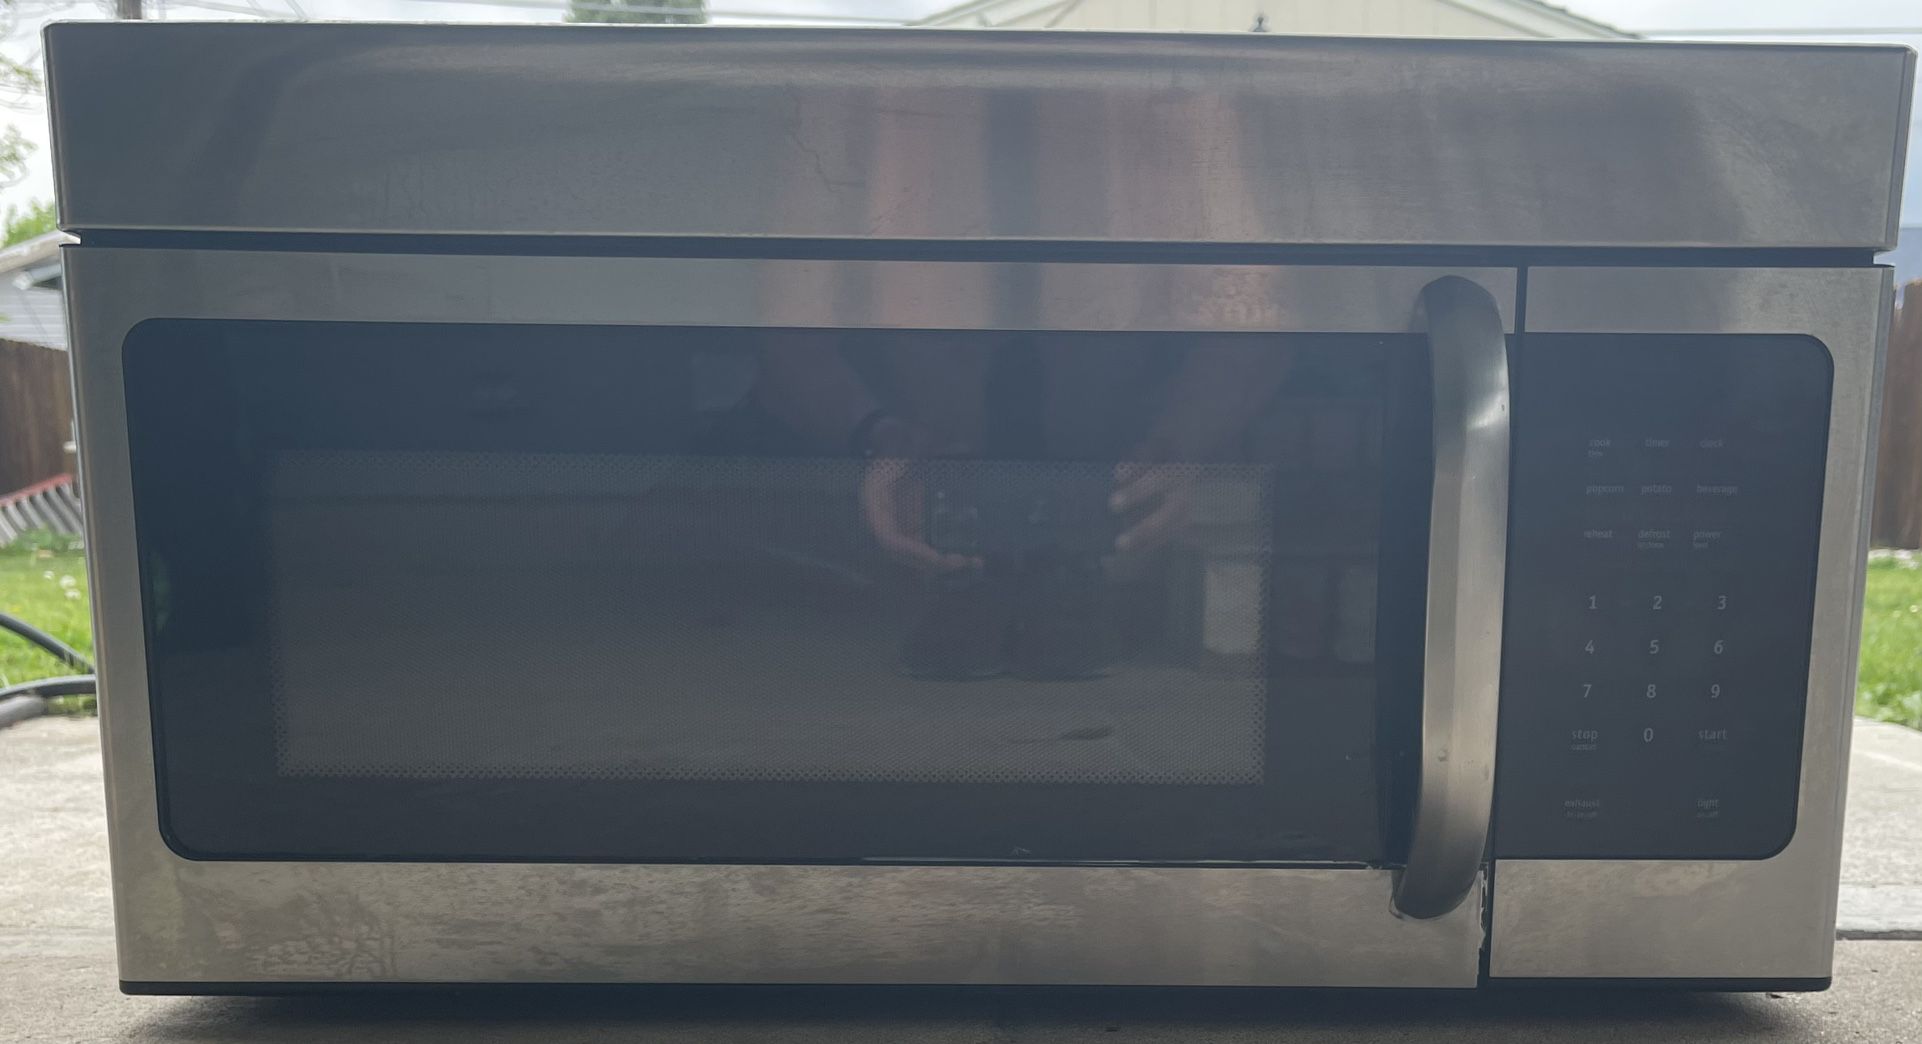 Over-the-Range Microwave Frigidaire - Stainless Steel